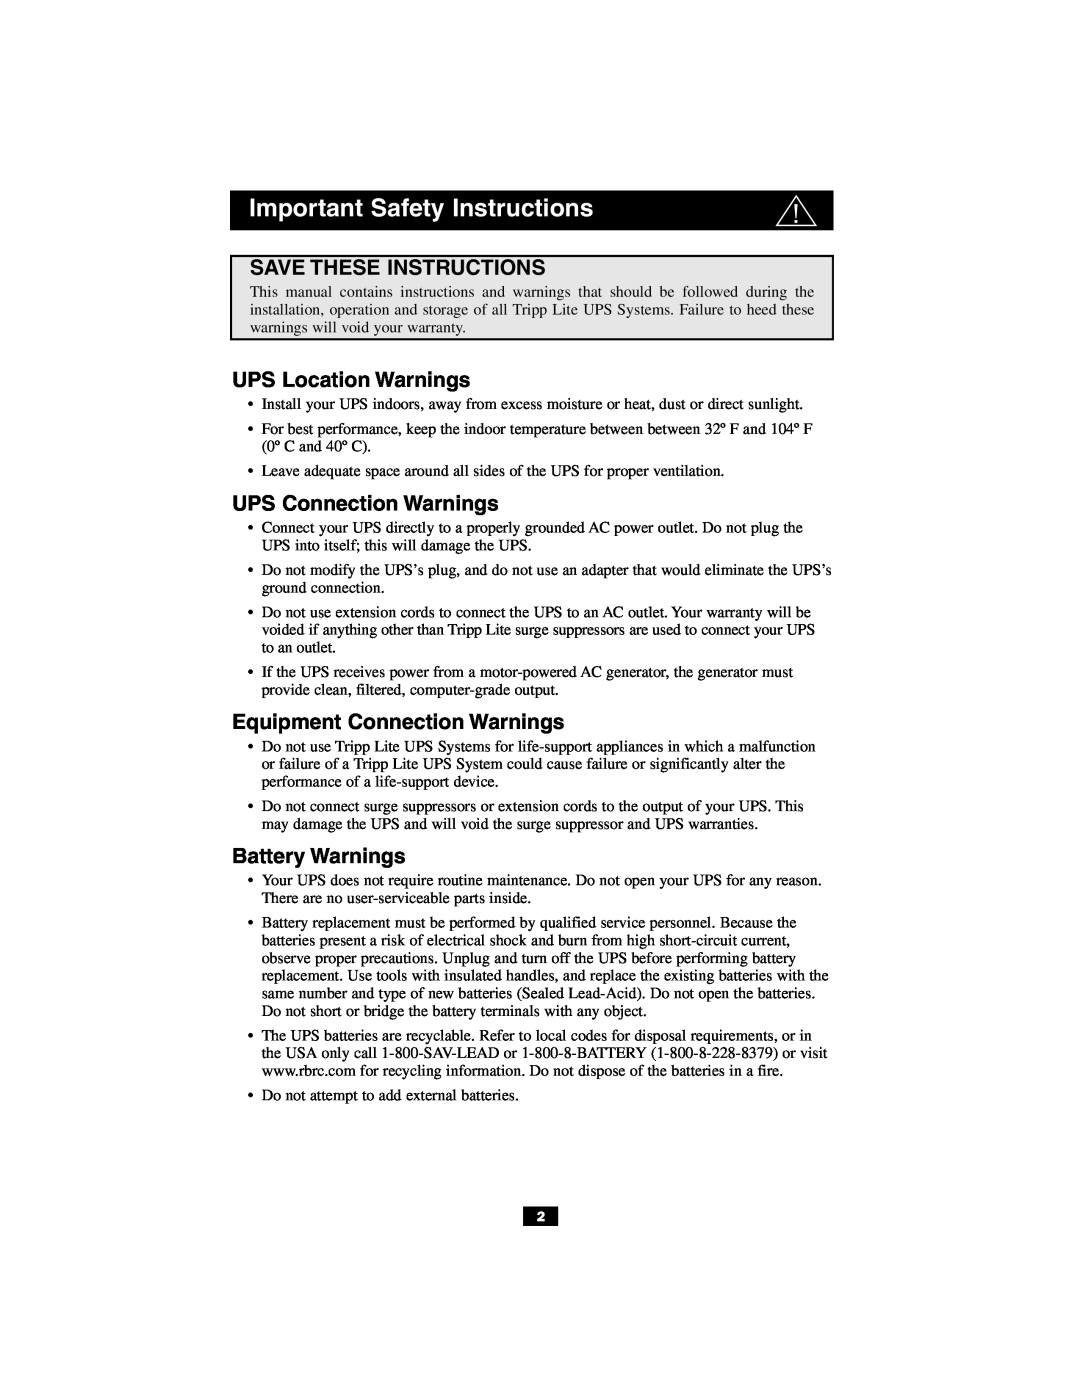 Tripp Lite OmniSmart & SmartPro USB owner manual Save These Instructions, UPS Location Warnings, UPS Connection Warnings 